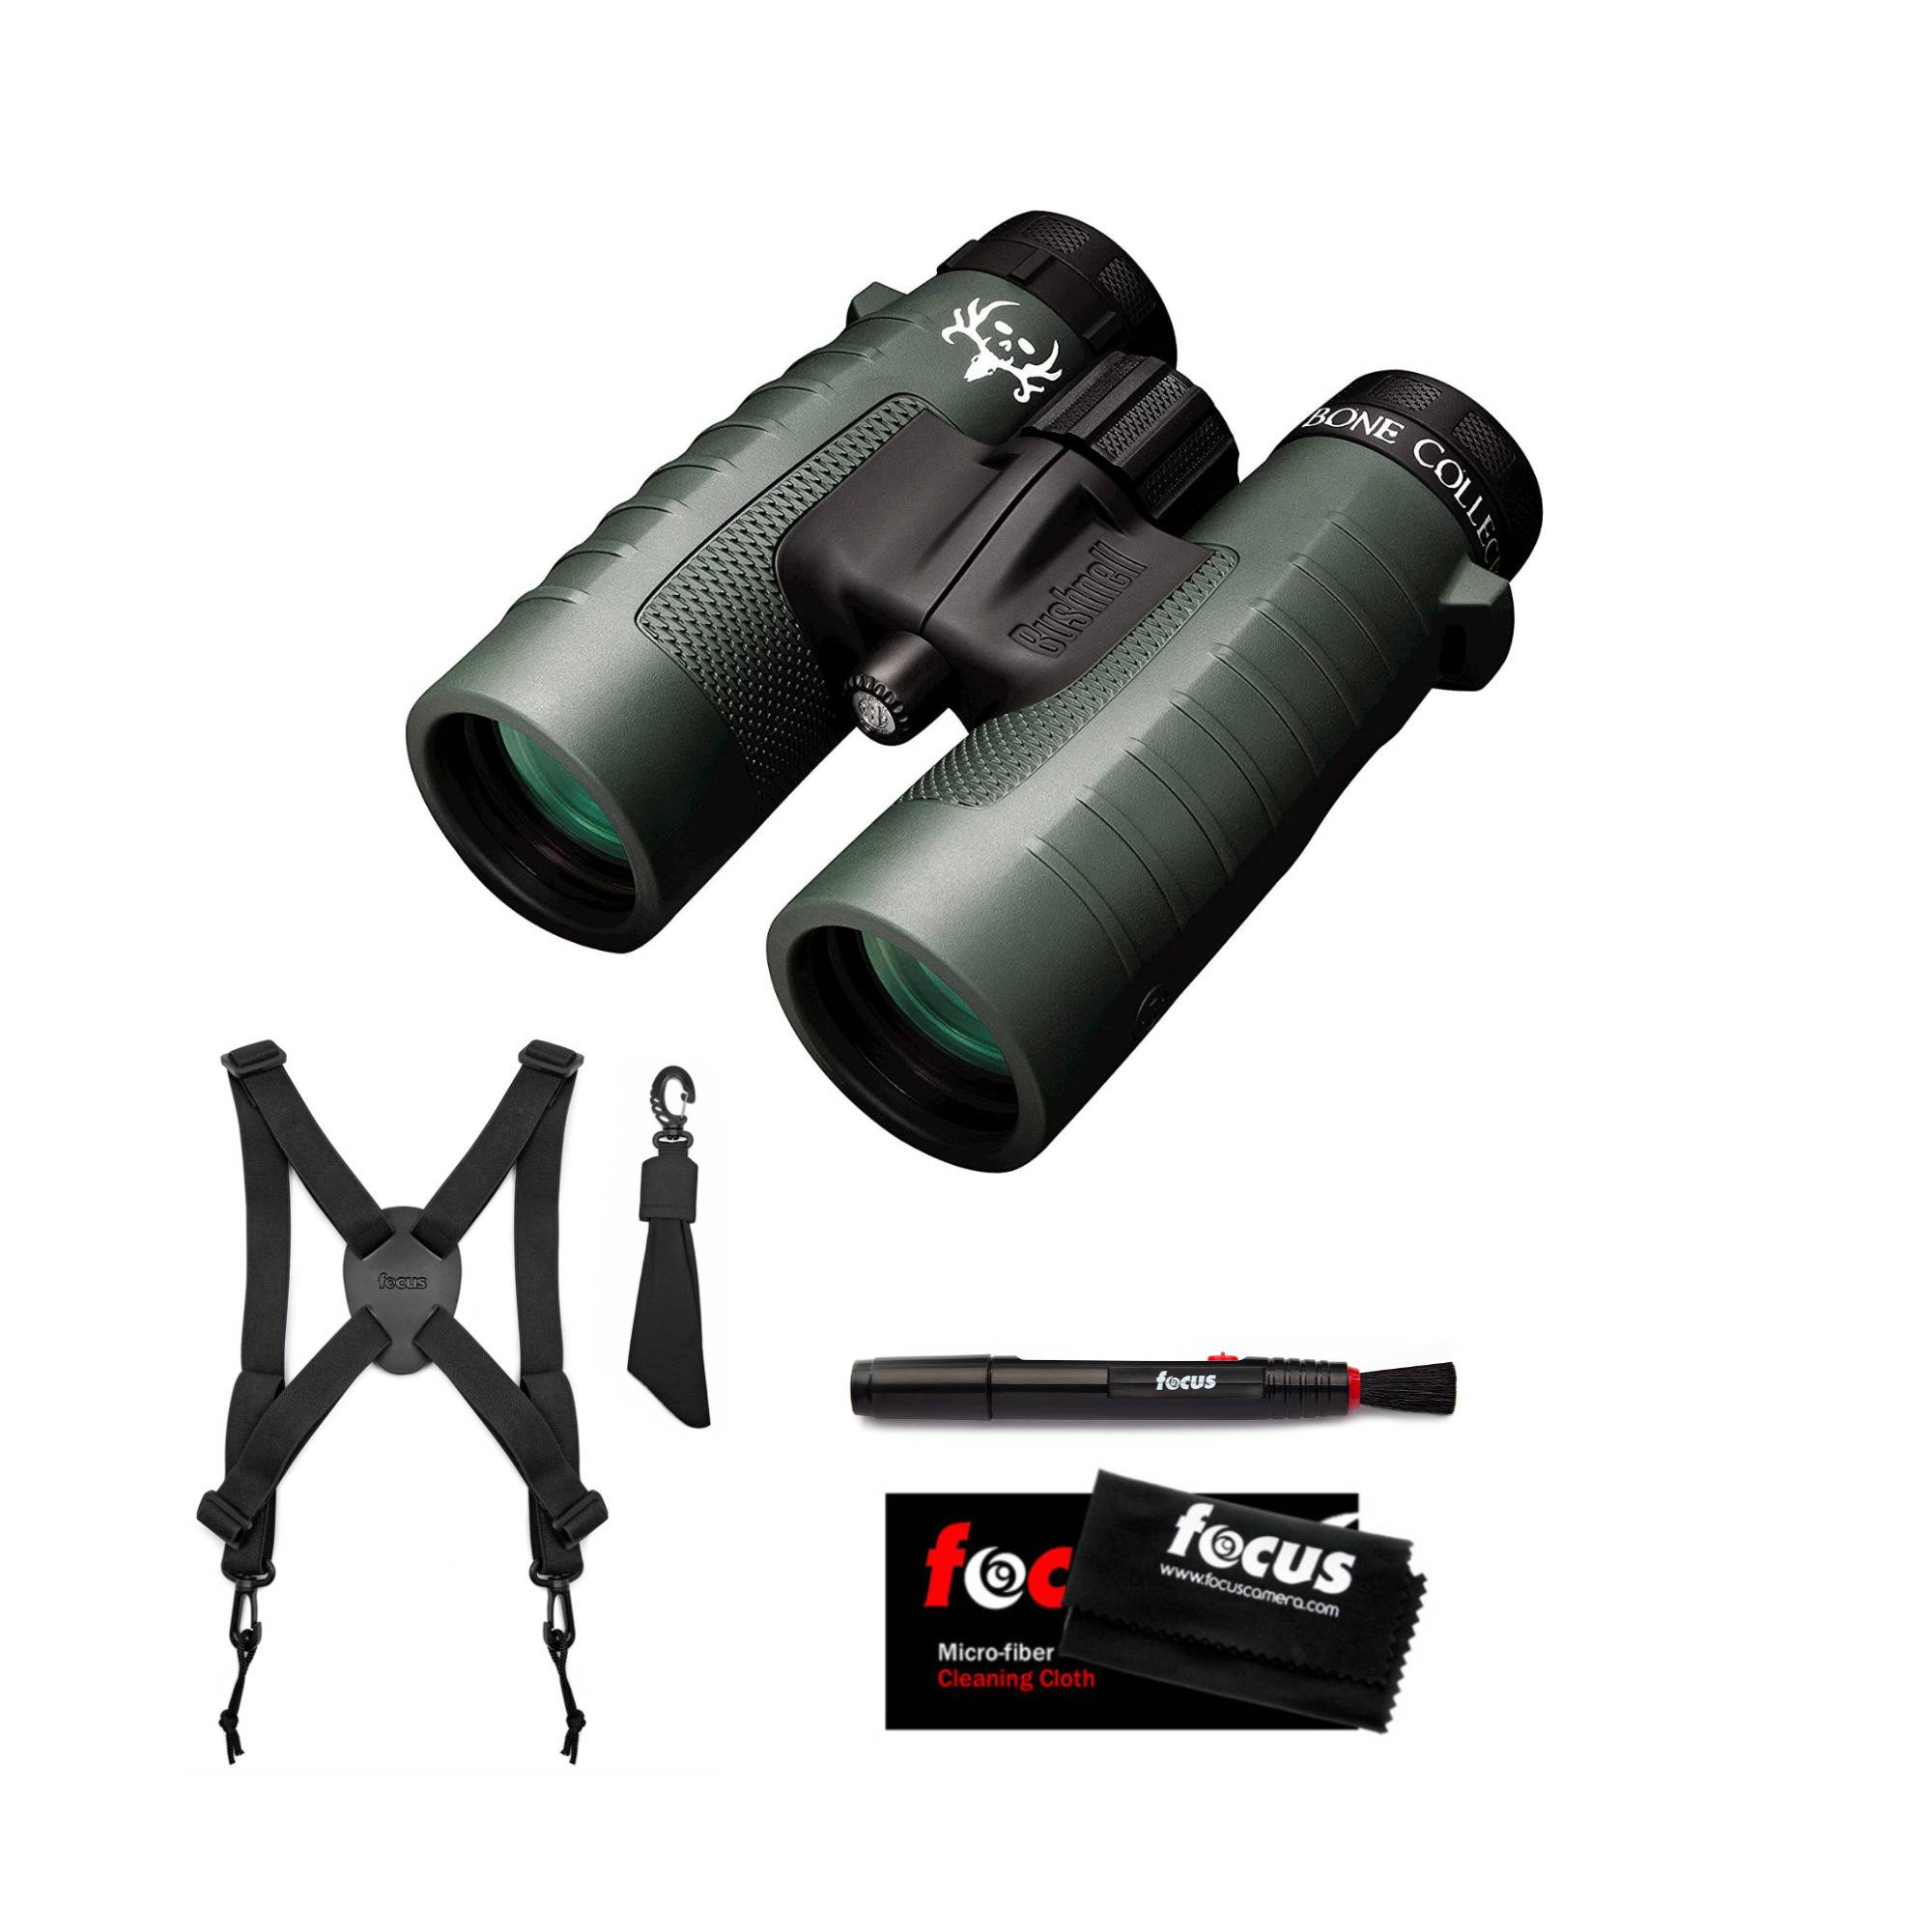 Bushnell Trophy 10x42 Waterproof Binoculars with Binocular Harness, Cleaning Pen and Cloth